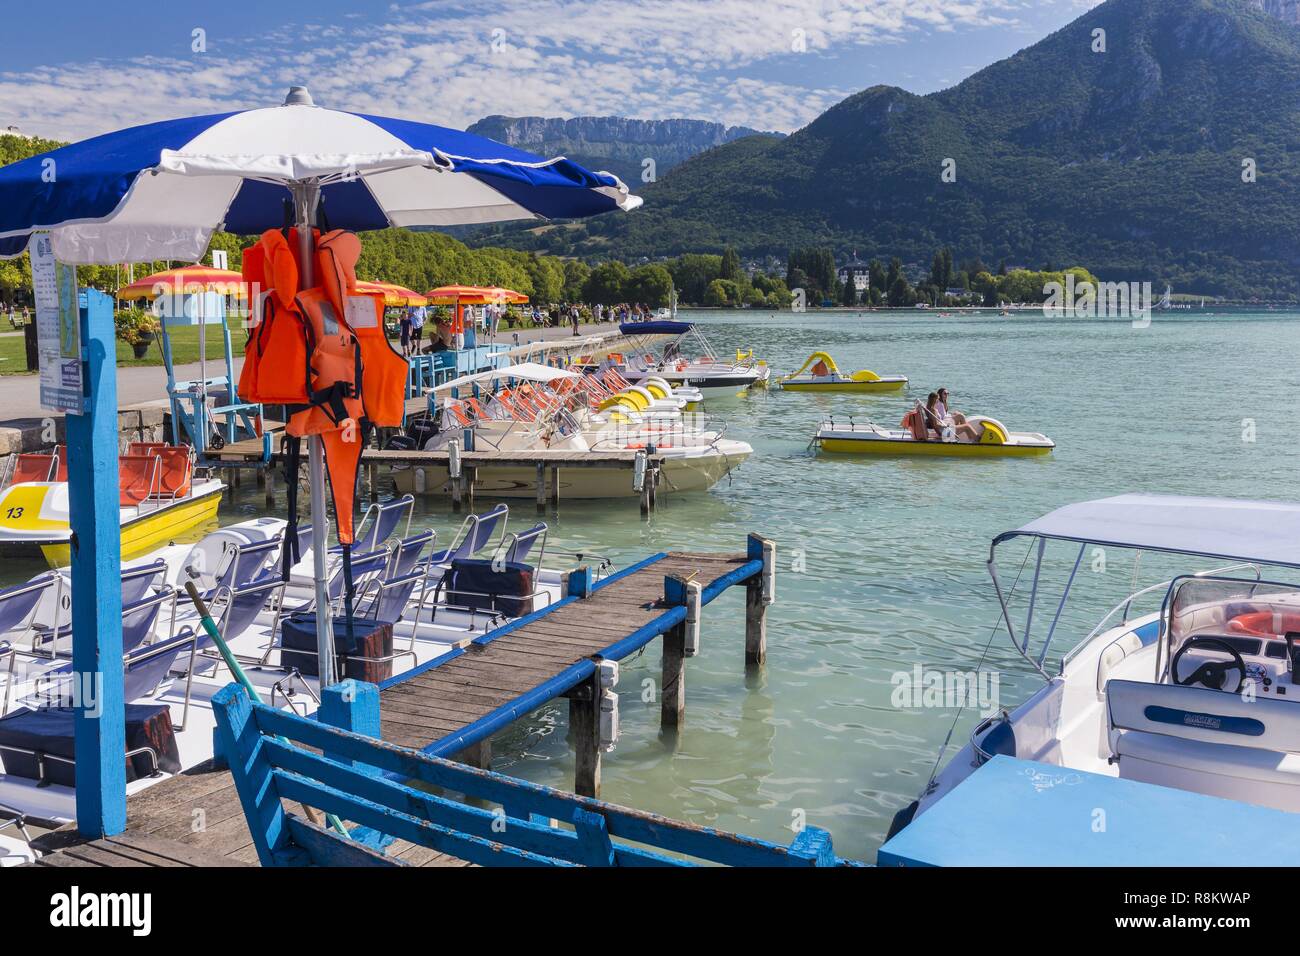 France, Haute Savoie, Annecy, the quay on the border of the lake Stock Photo